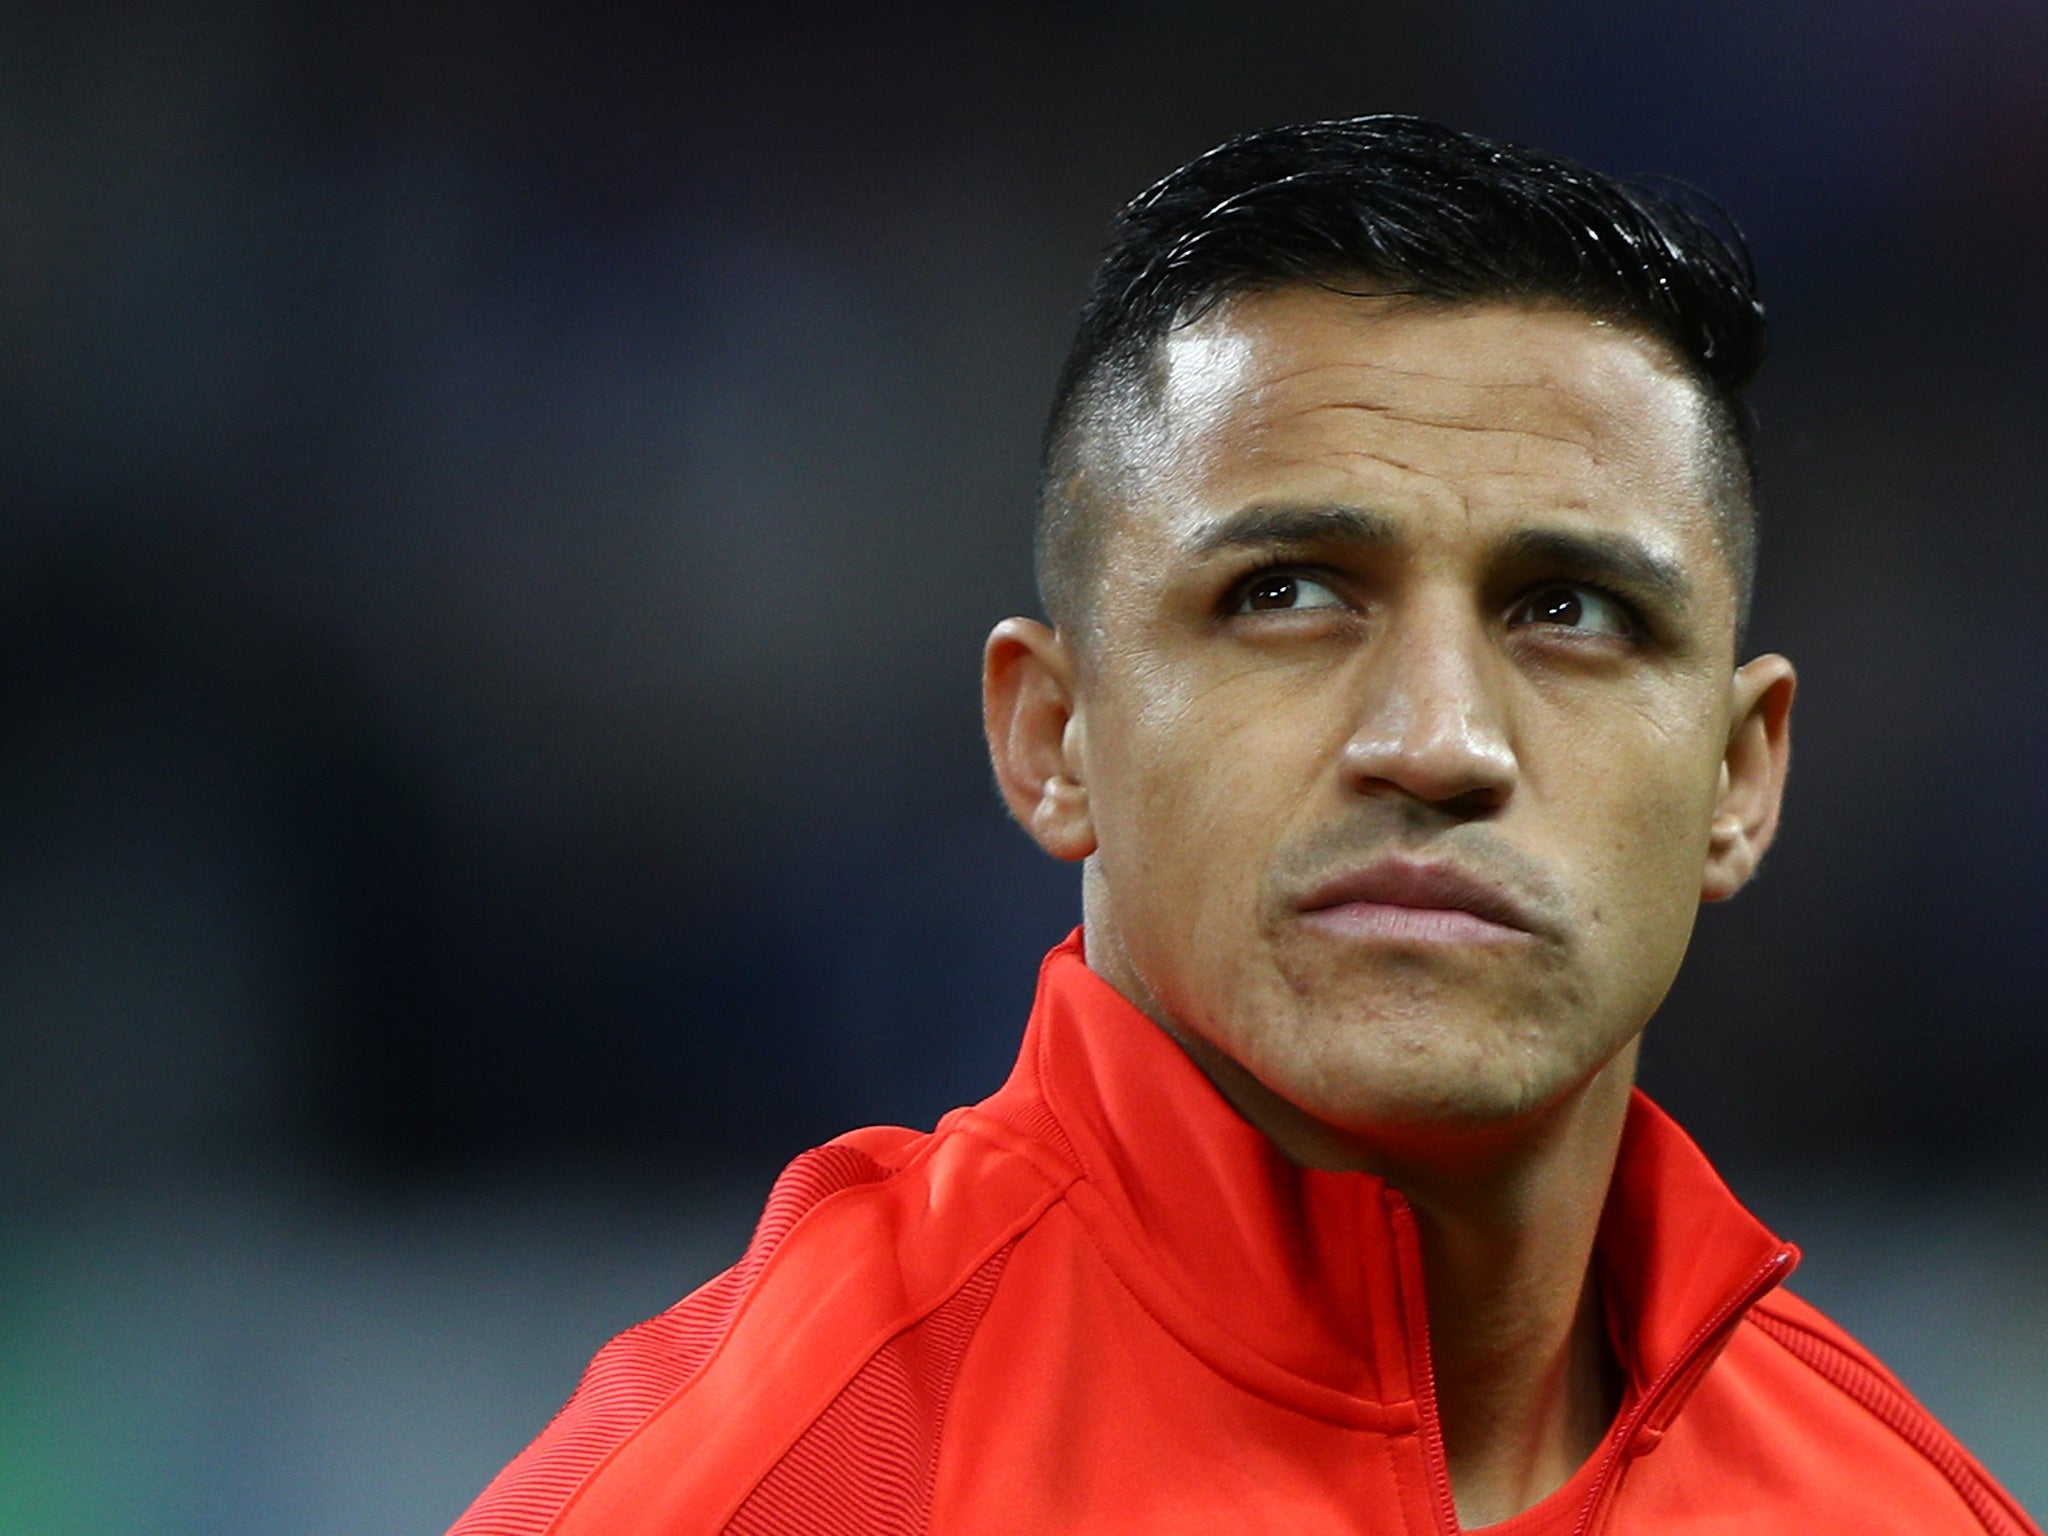 Sanchez has just one year remaining on his current contract at Arsenal